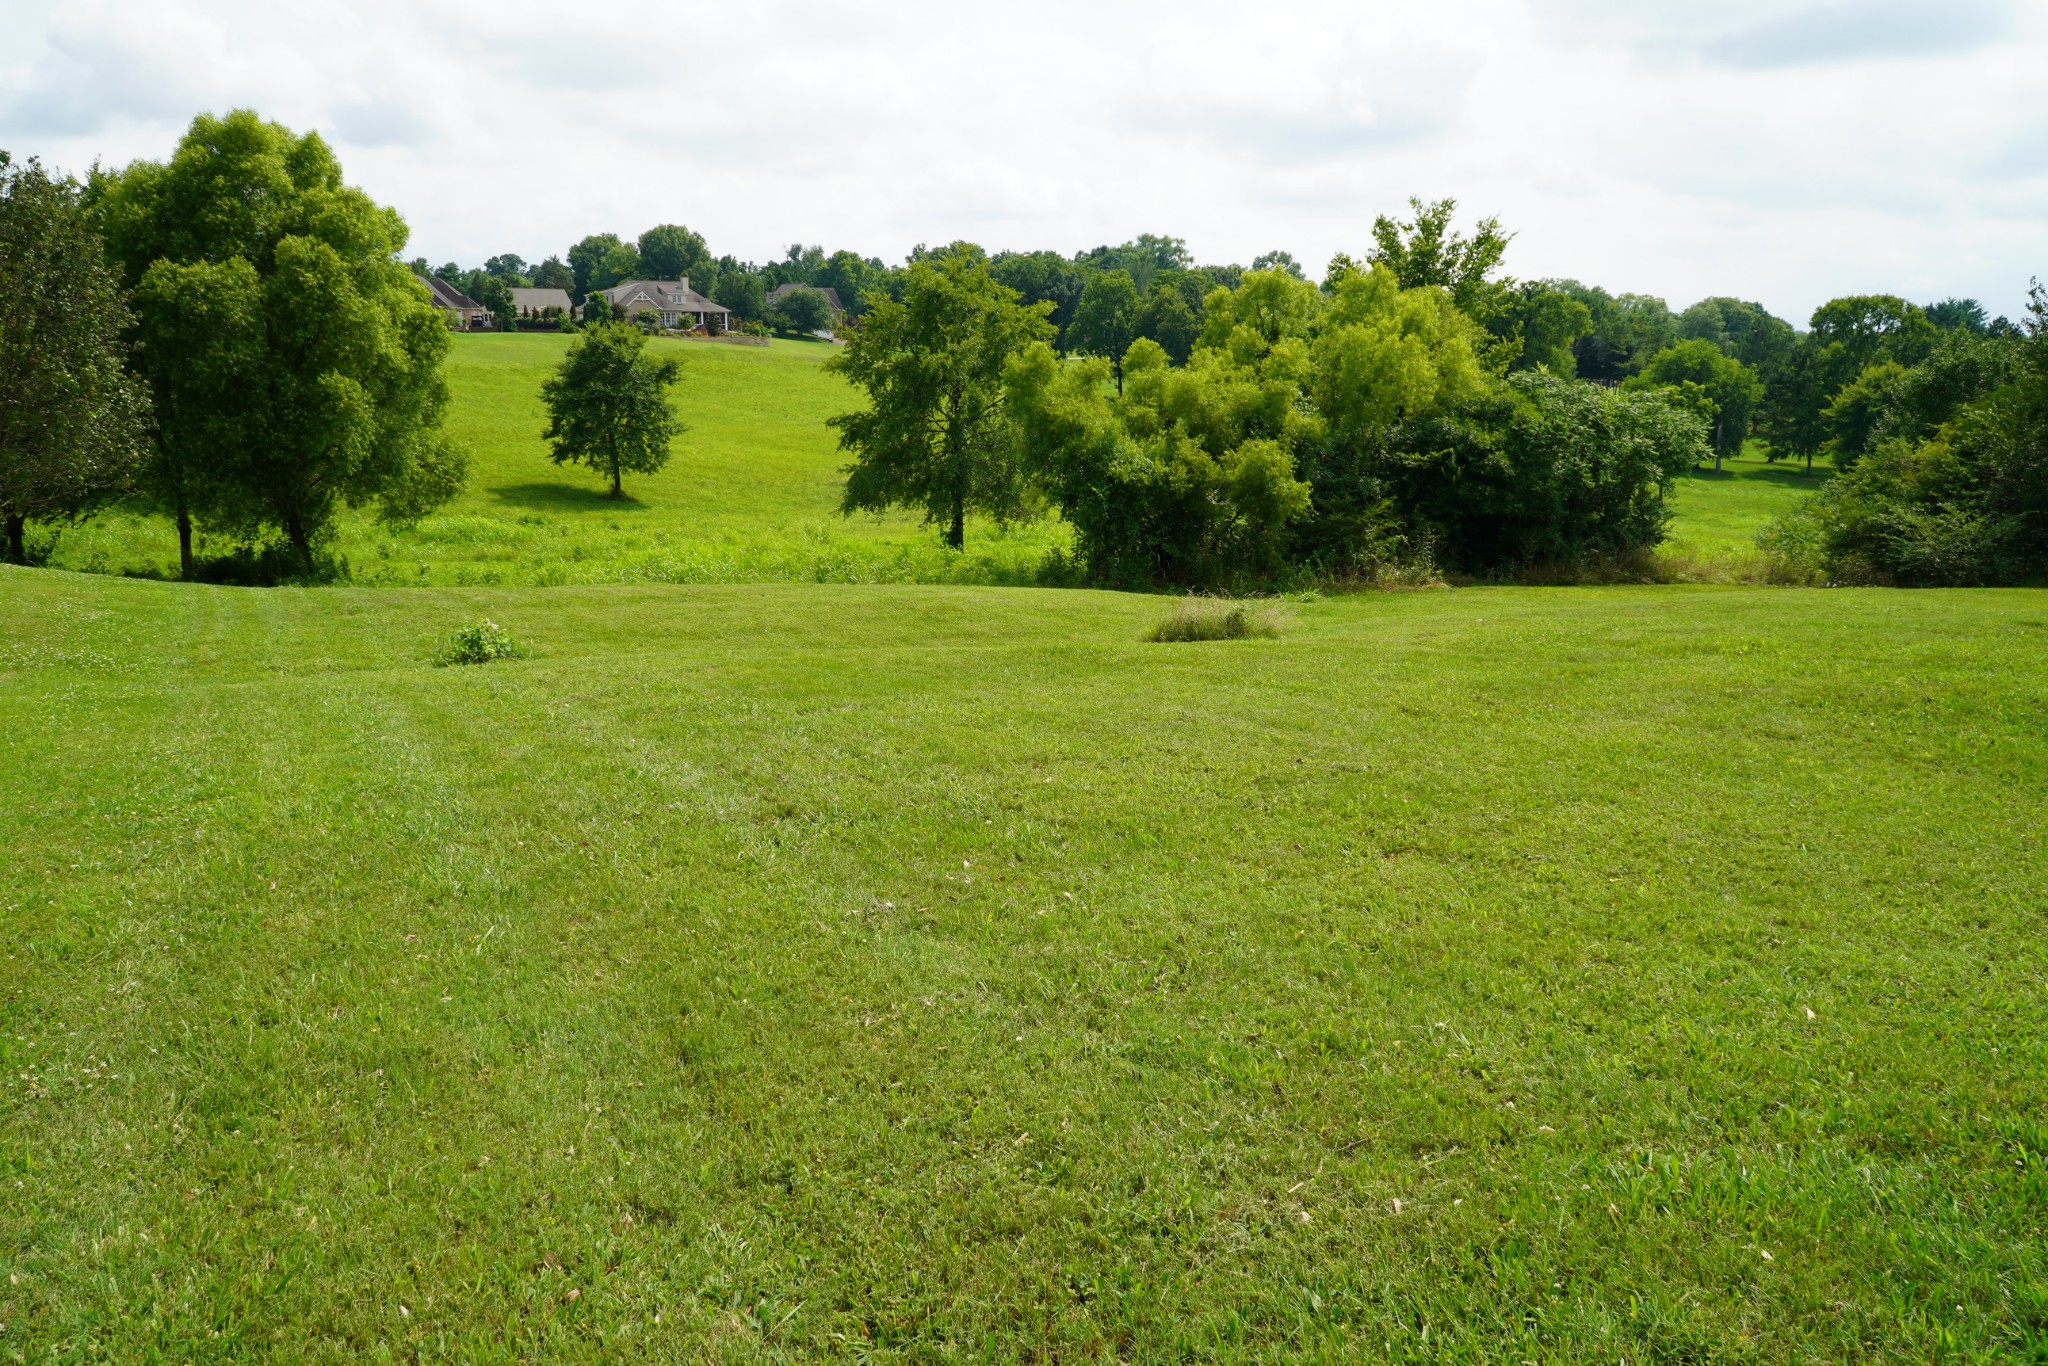 a view of a grassy field with trees